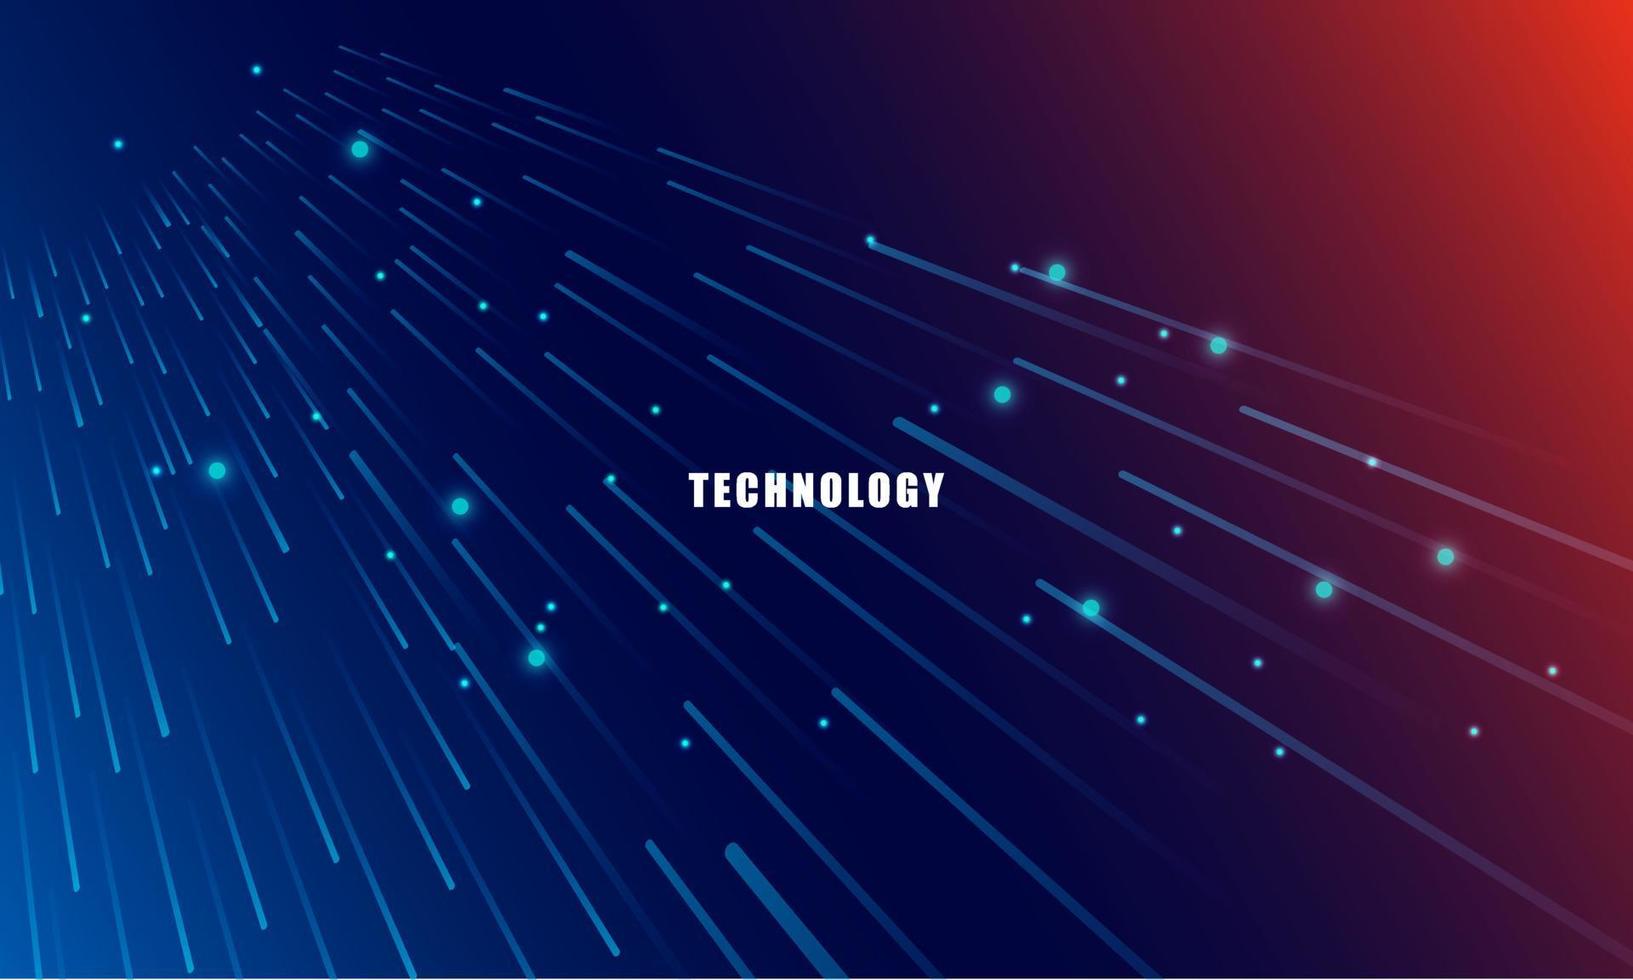 Abstract technology concept particle connection background with blue and red lights. vector